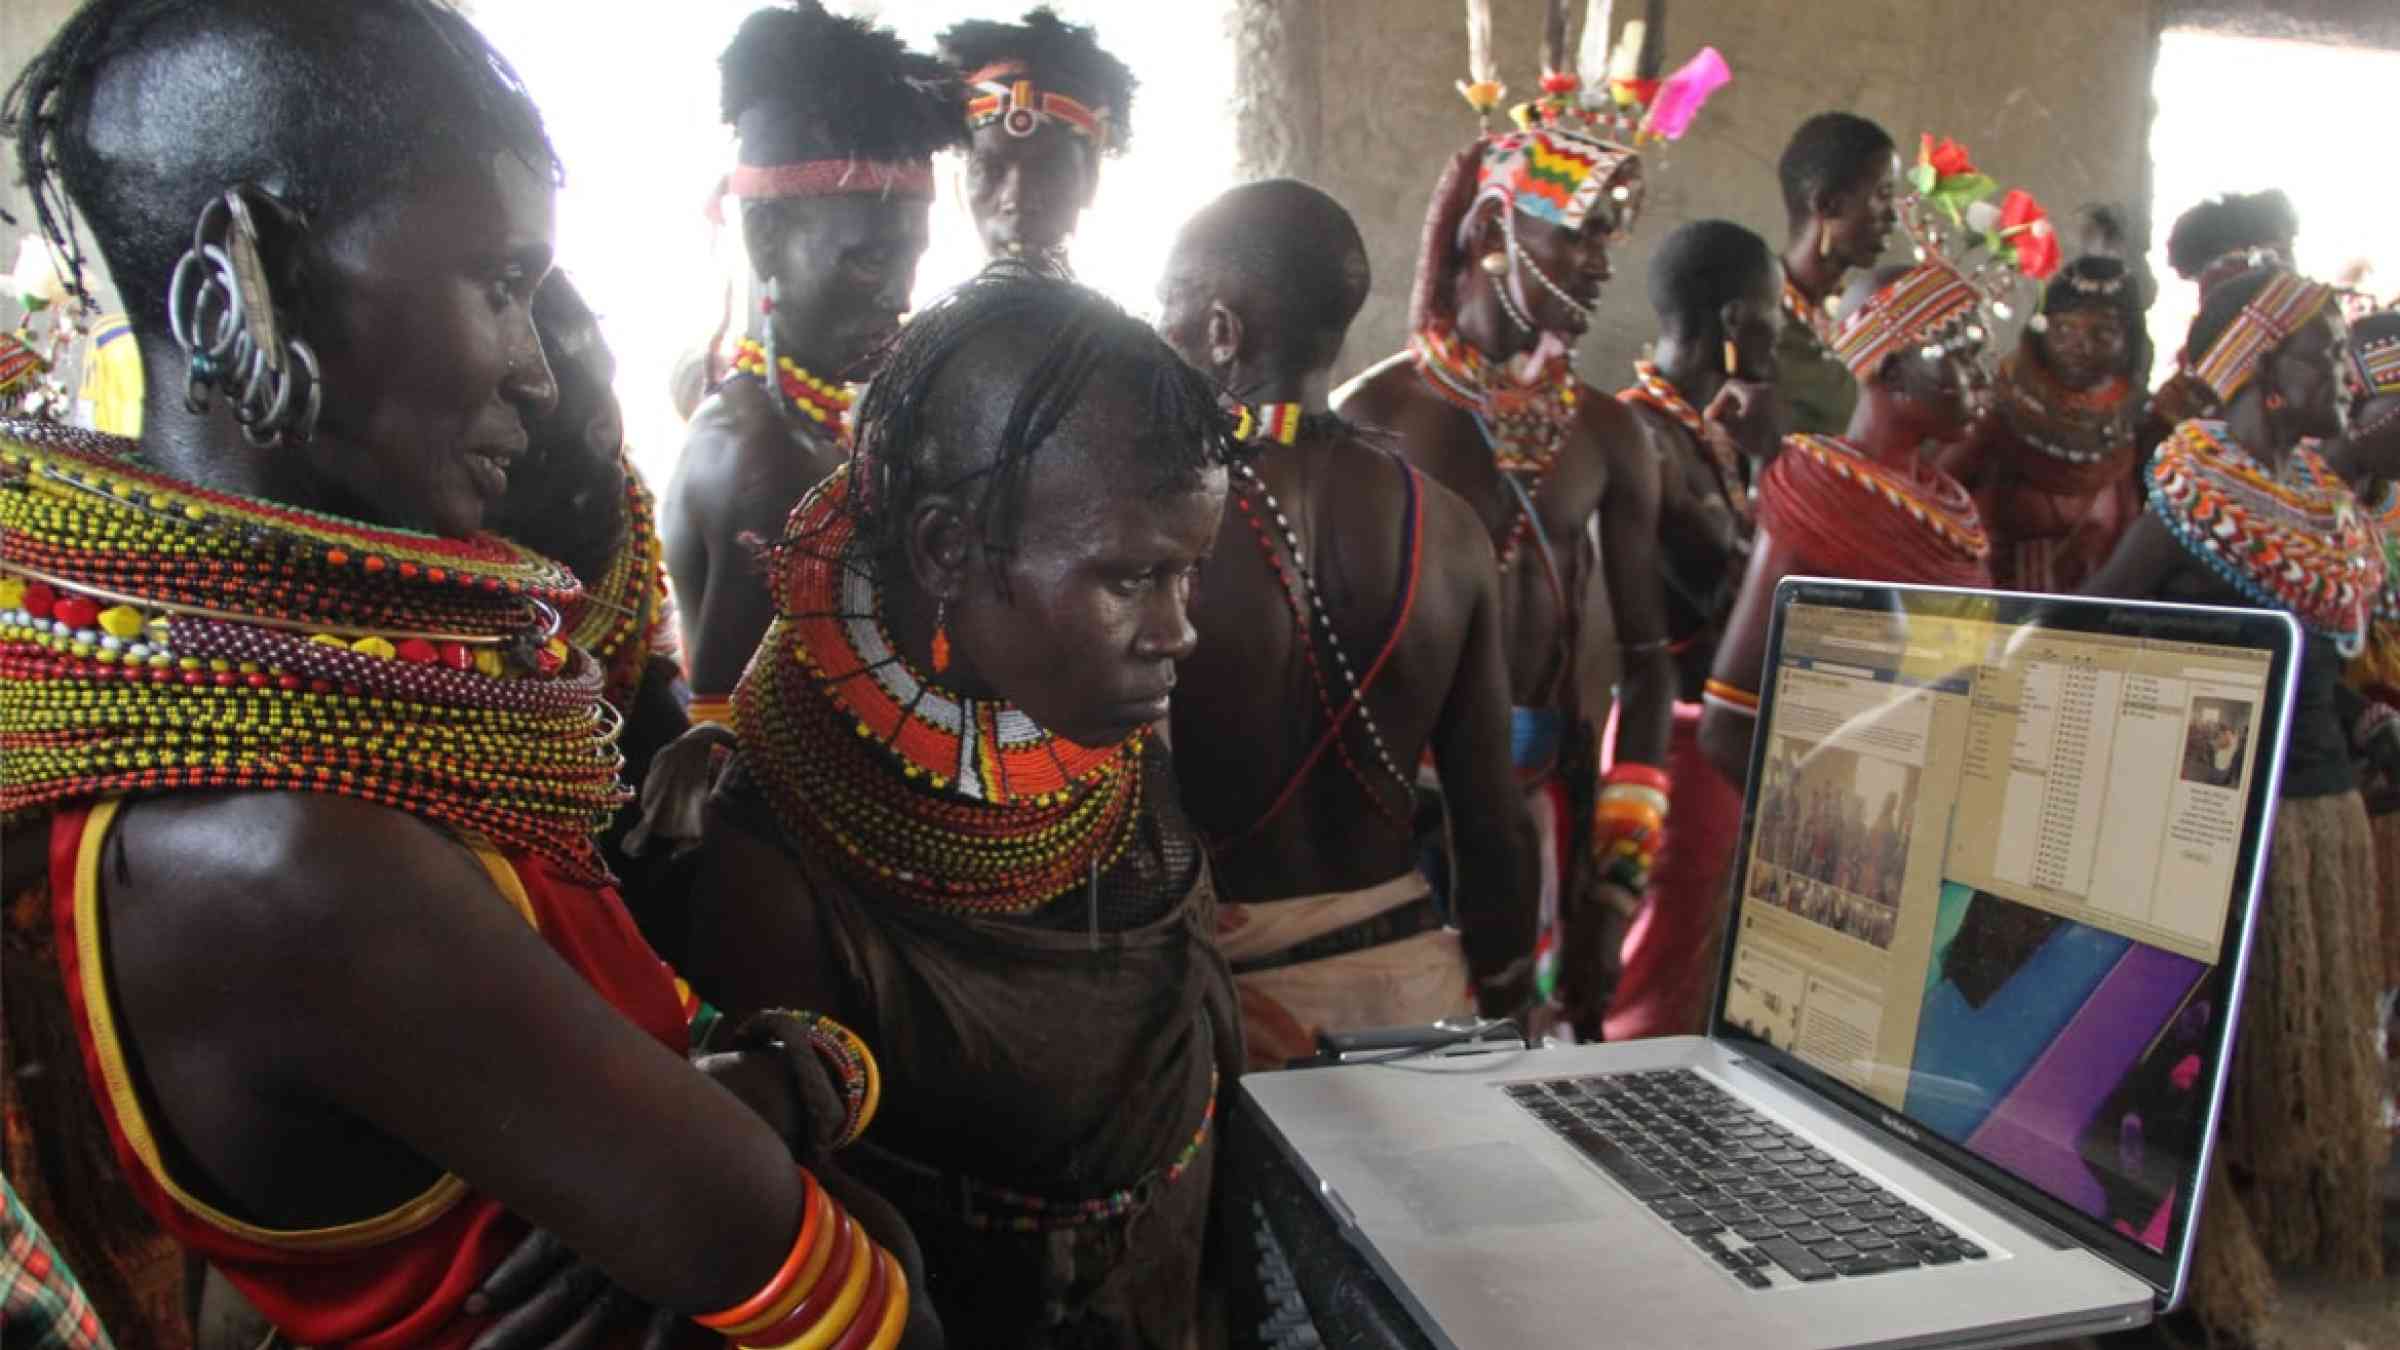 Turkana women from Kenya look at images and video